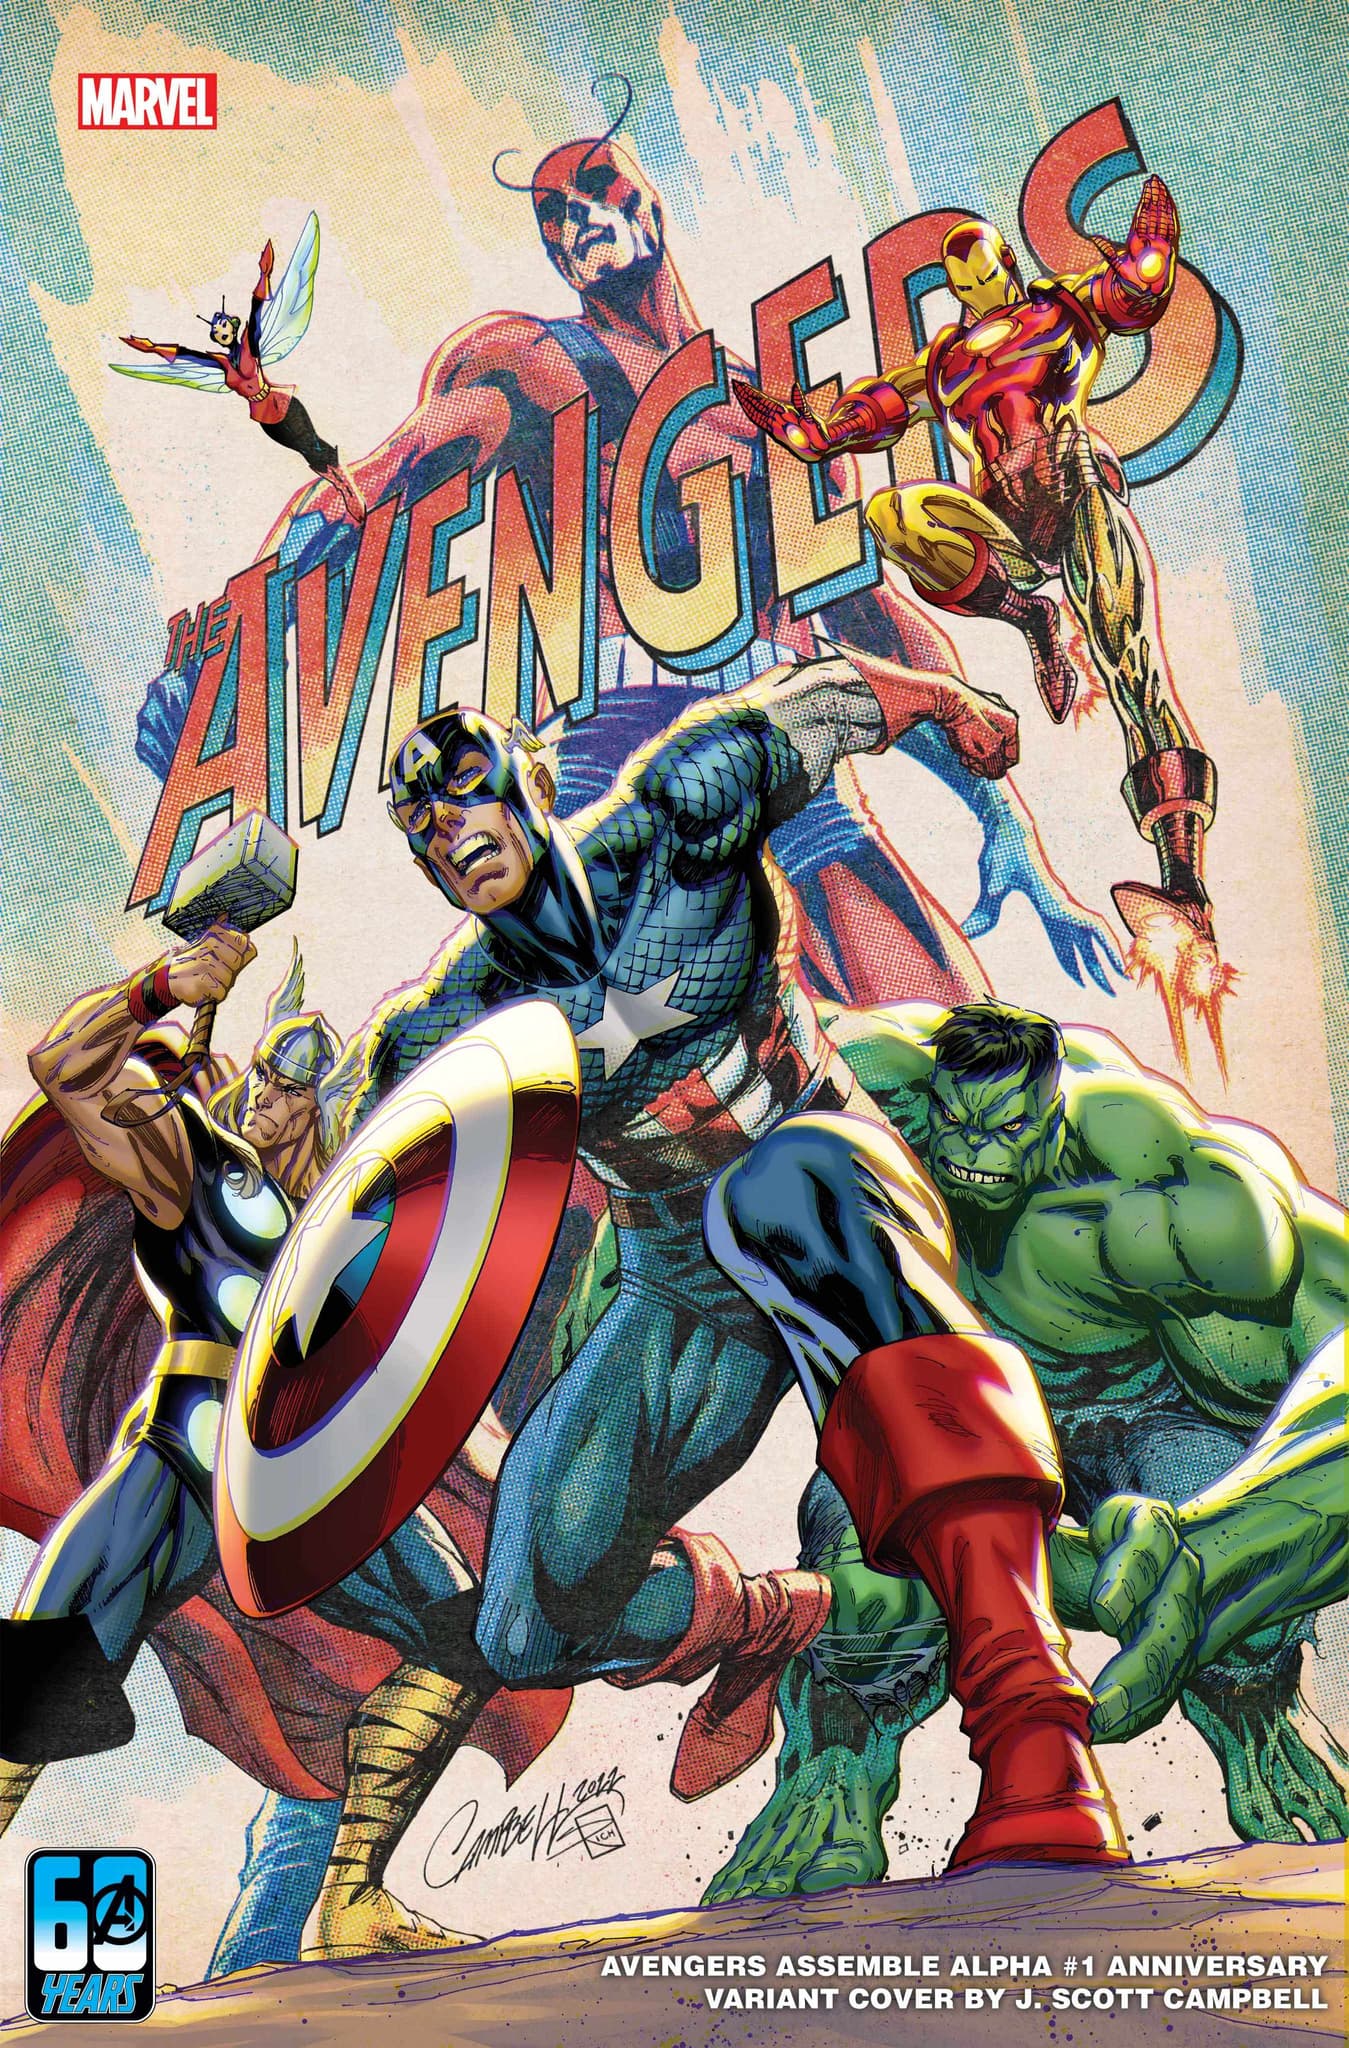 AVENGERS ASSEMBLE ALPHA #1 Anniversary Variant Cover by J. Scott Campbell